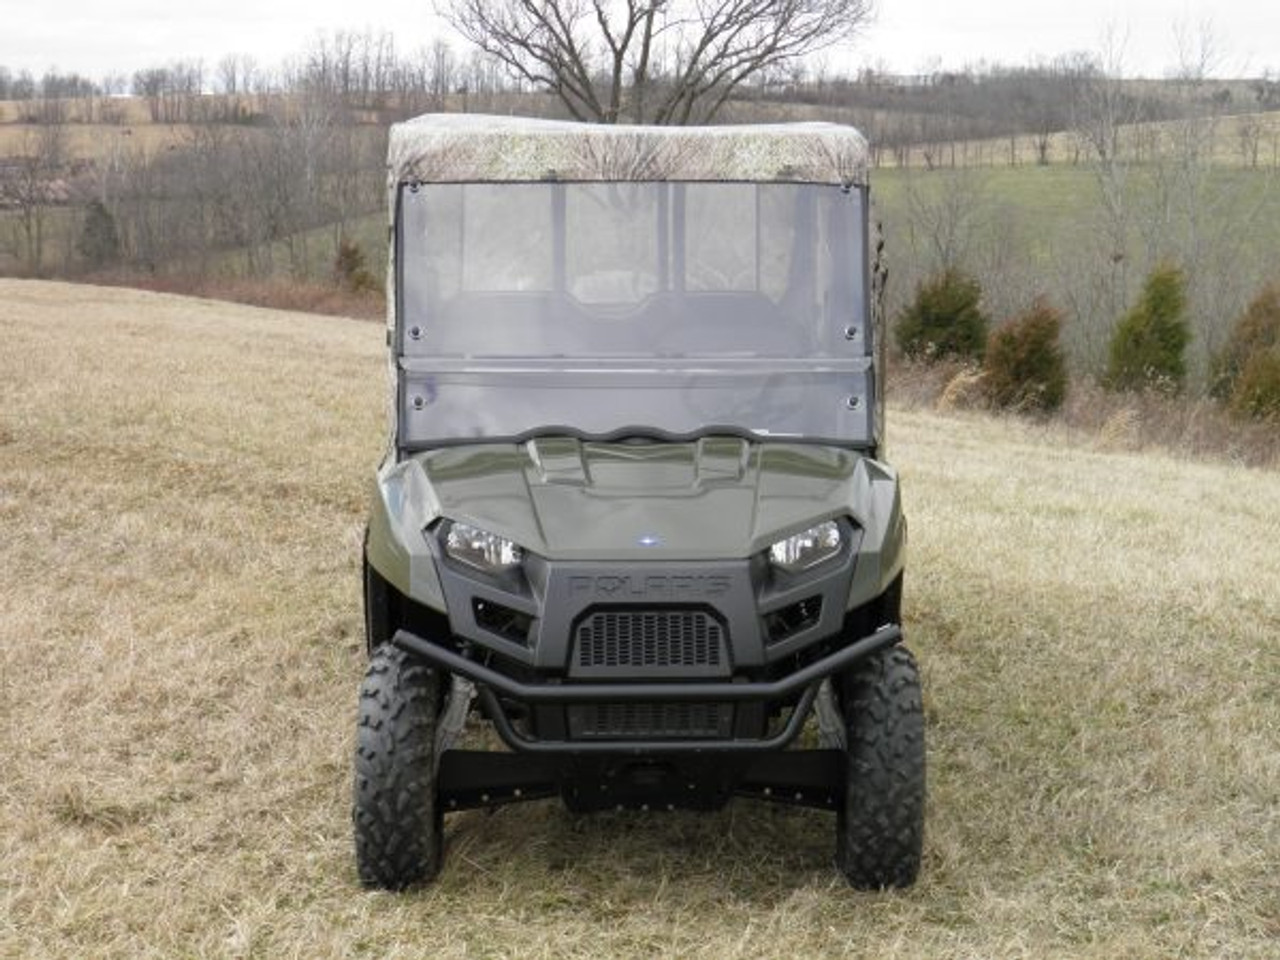 3 Star side x side Polaris Ranger Mid-Size Crew 500/570 full cab enclosure front view